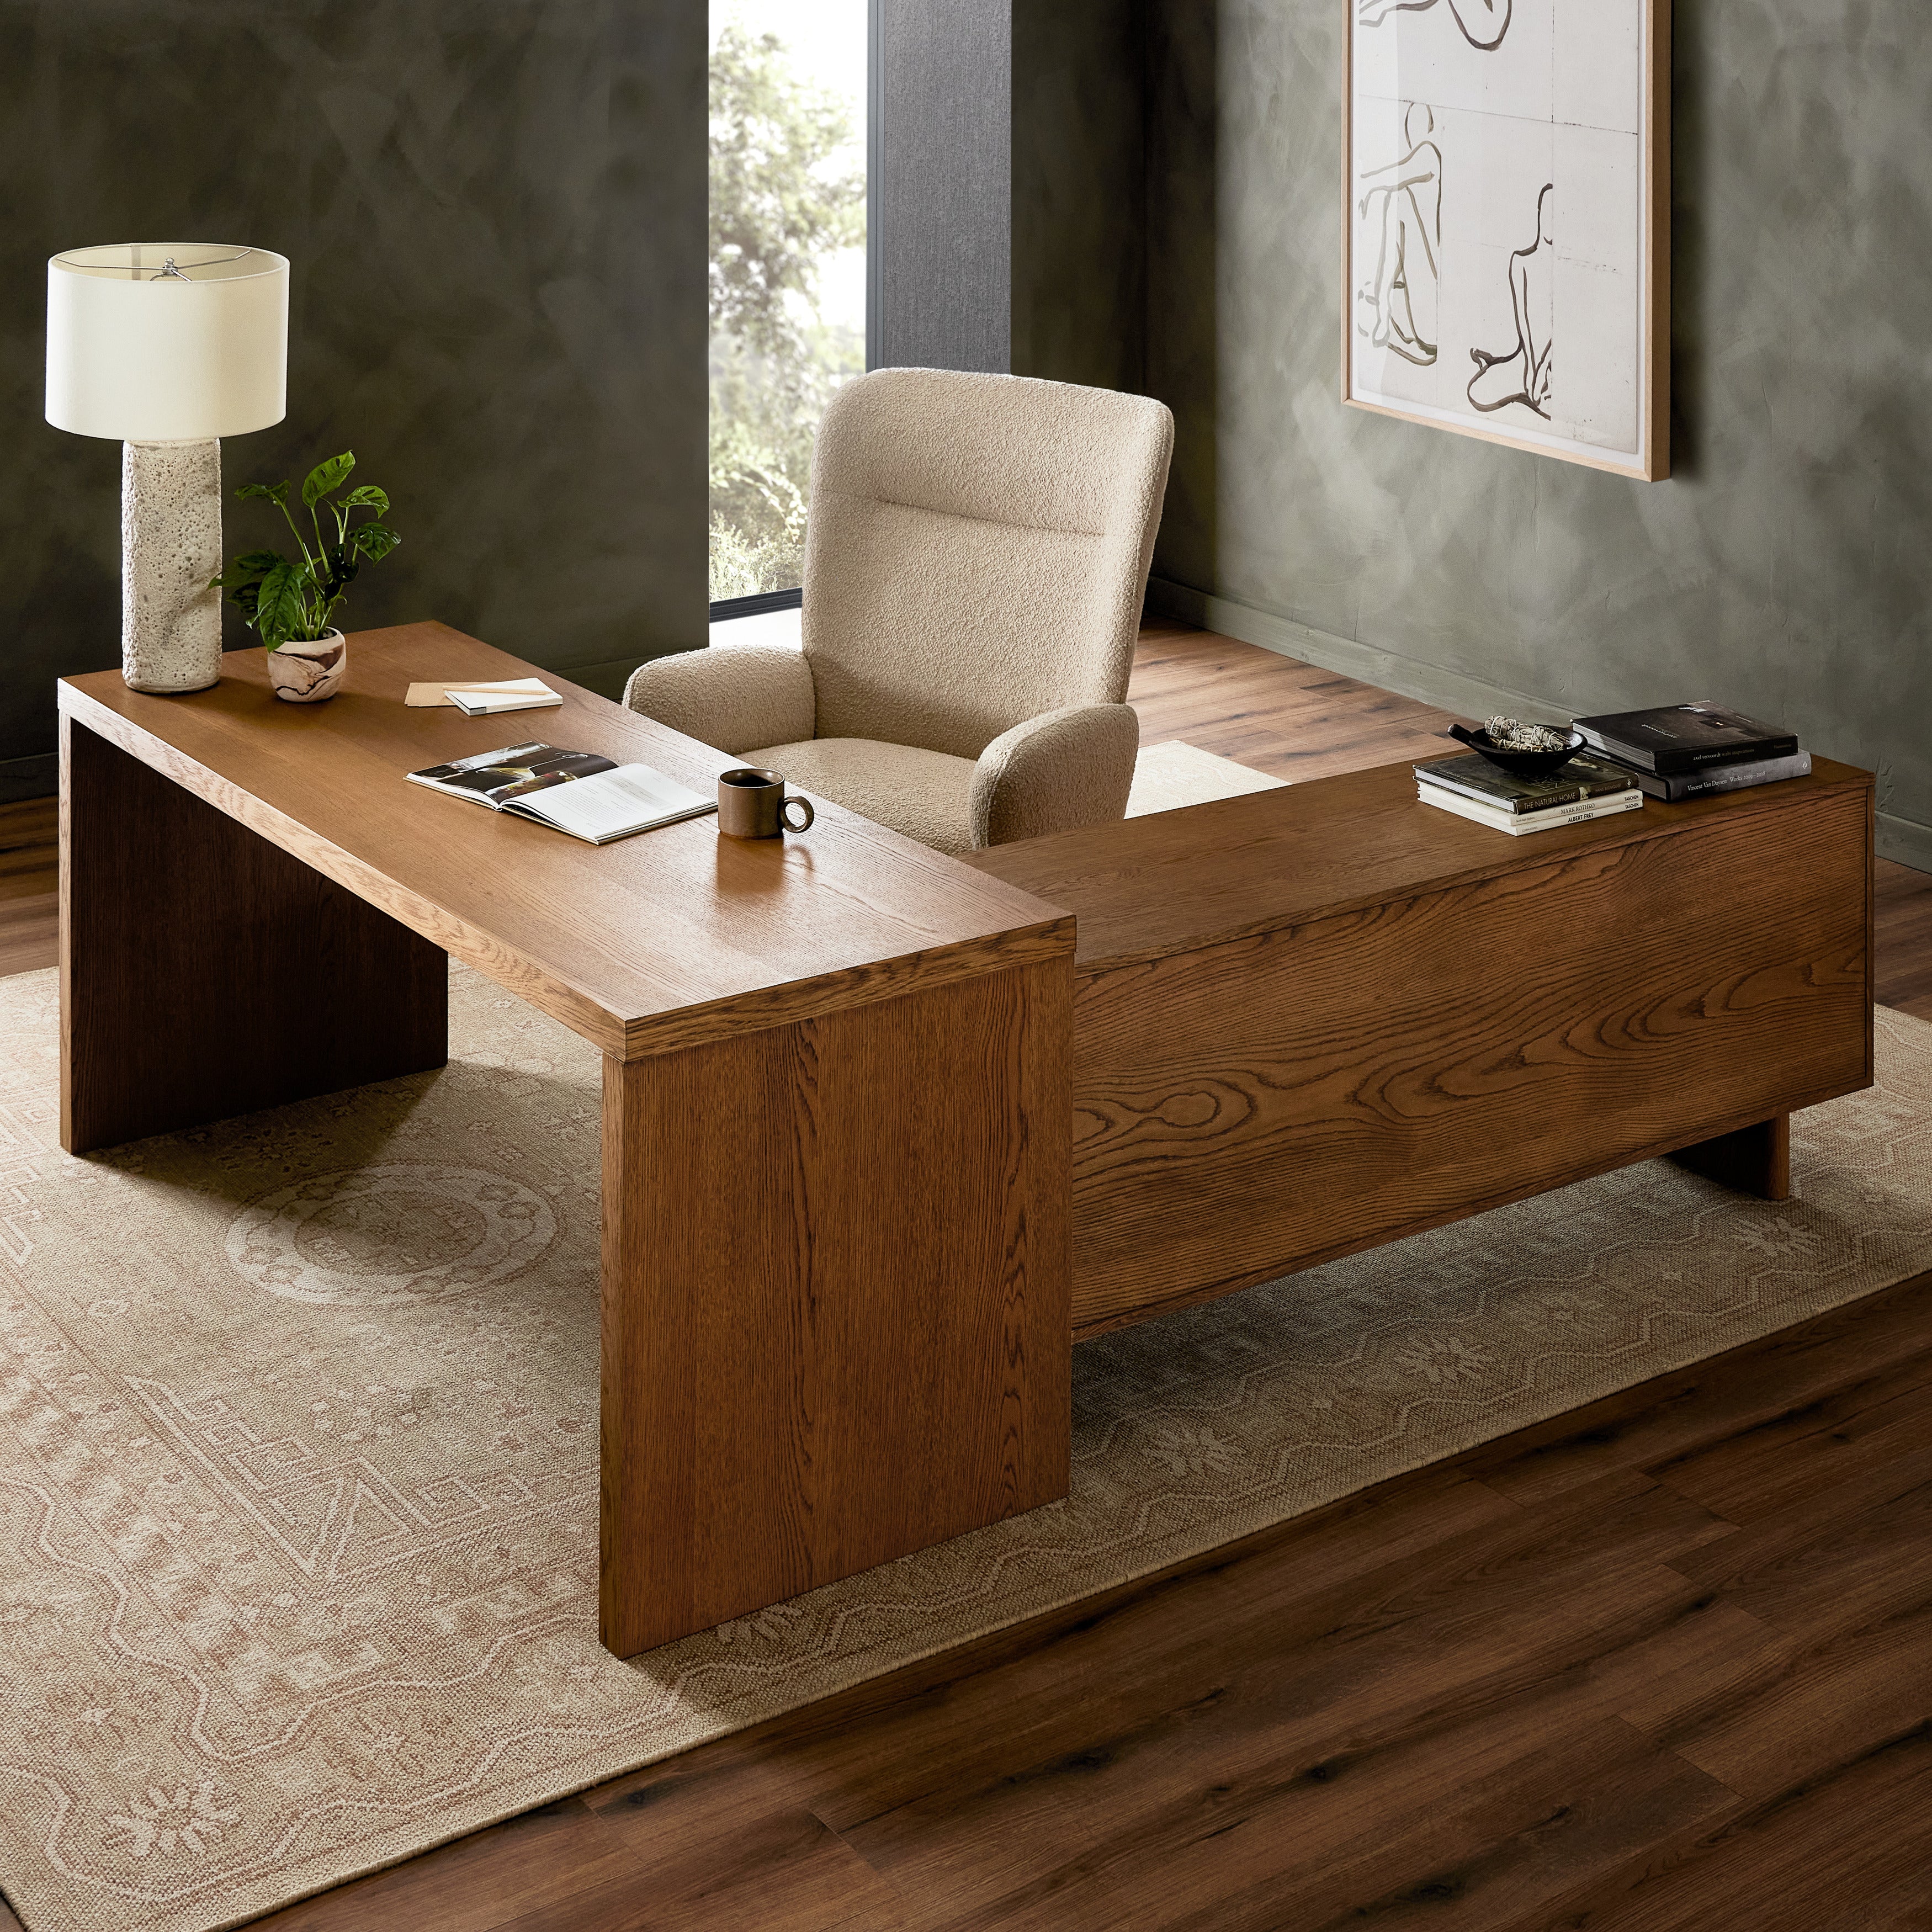 Reflect your unique style with a modular desk and matching media console of amber-finished oak and cognac top-grain leather. Arrange to suit your space, while adding plenty of storage space to the office. Amethyst Home provides interior design, new construction, custom furniture, and area rugs in the Miami metro area.